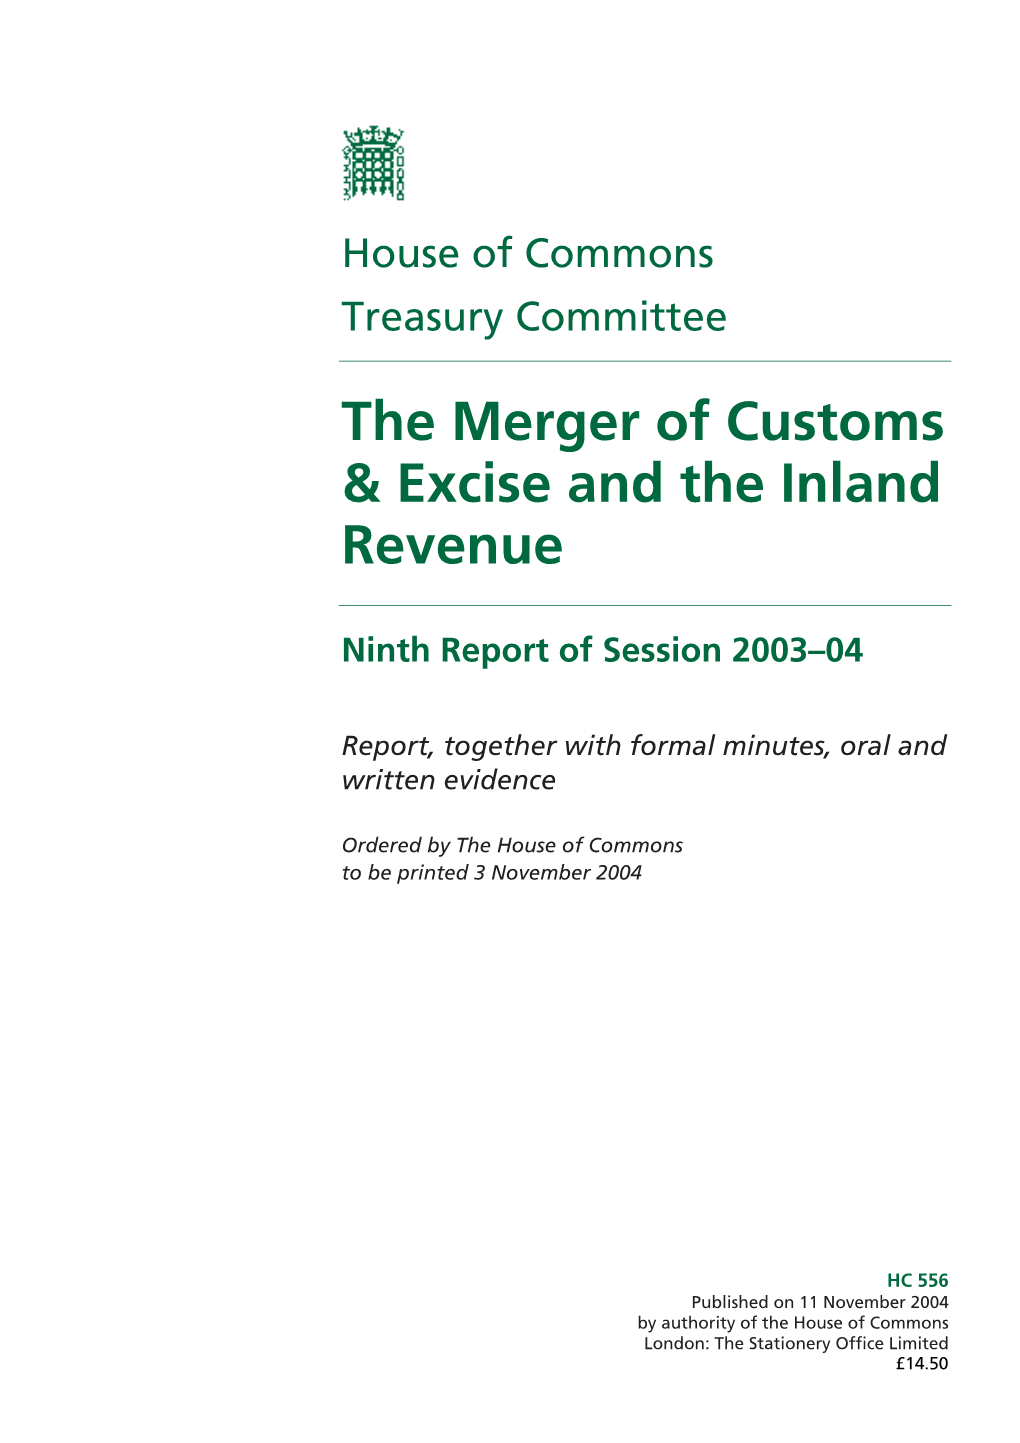 The Merger of Customs & Excise and the Inland Revenue